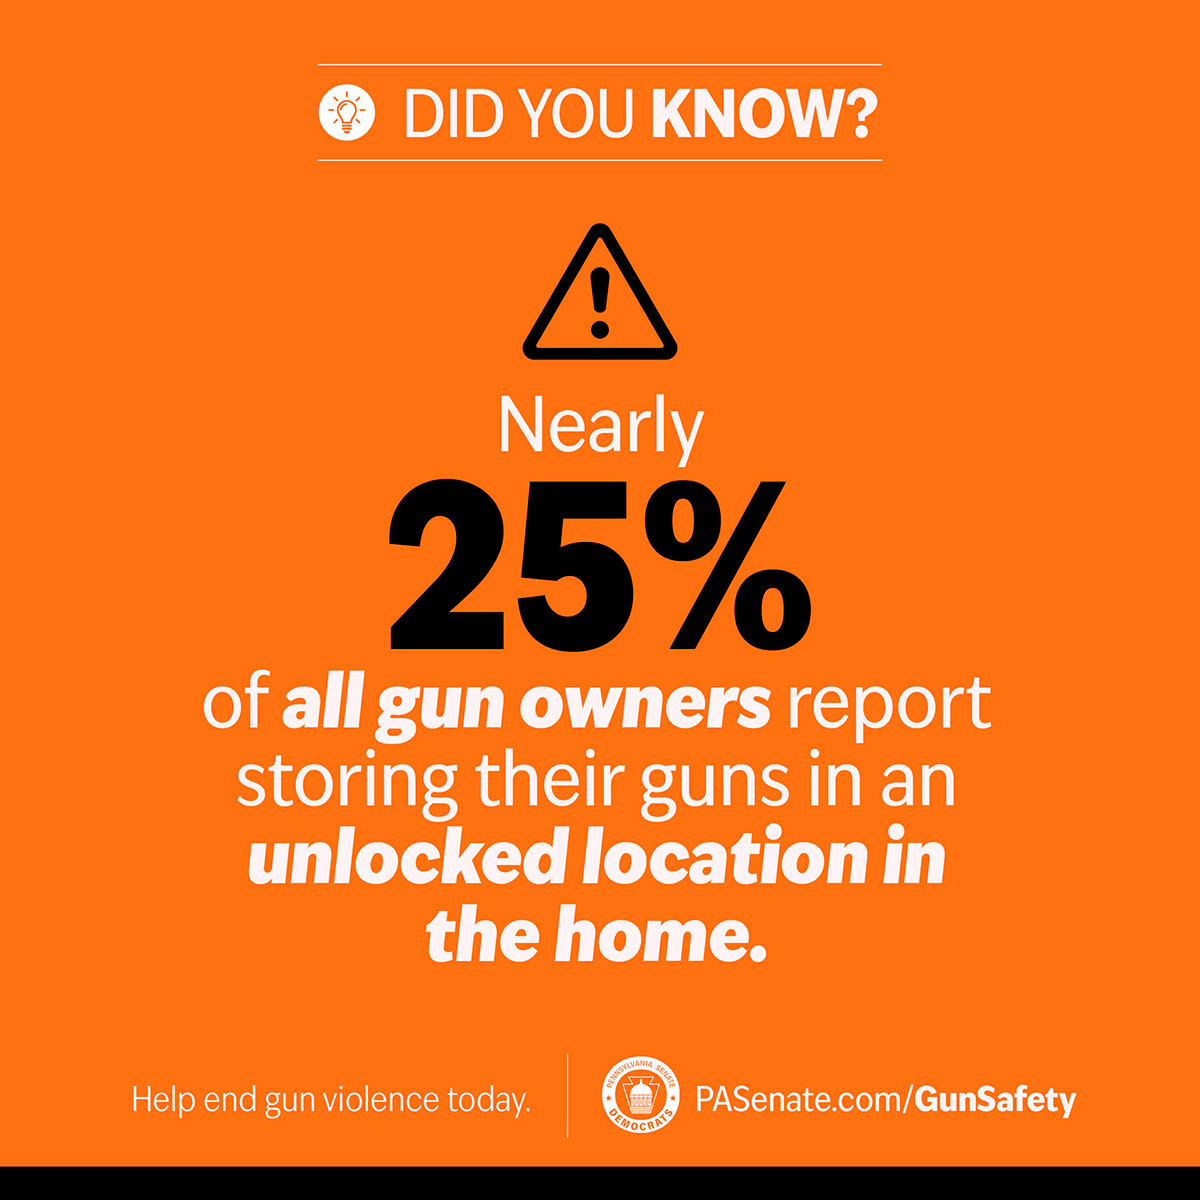 Did you know? Nearly 25% of all gun owners report storing their guns in an unlocked location in the home.